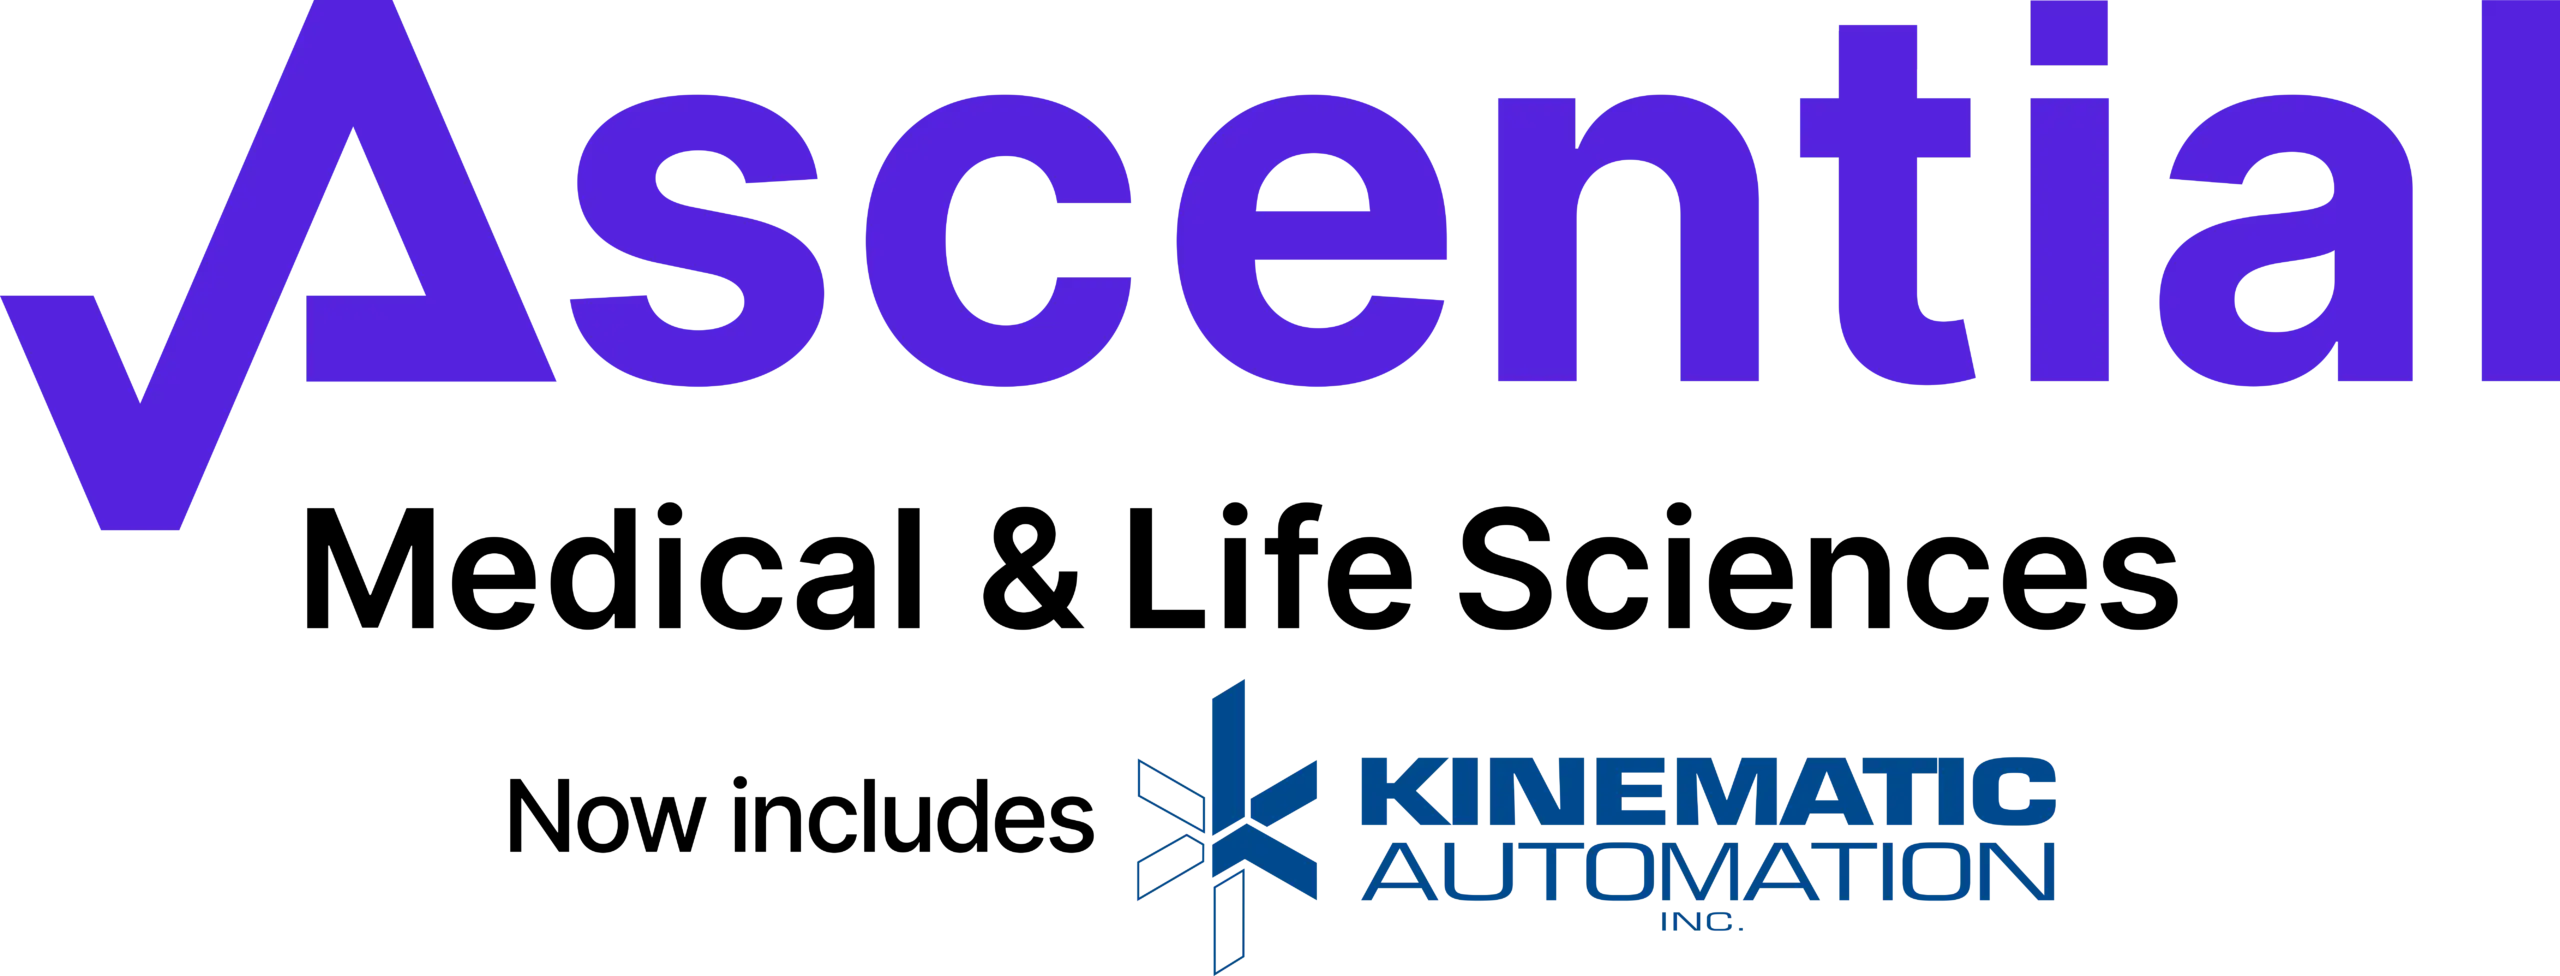 Ascential now includes KA scaled